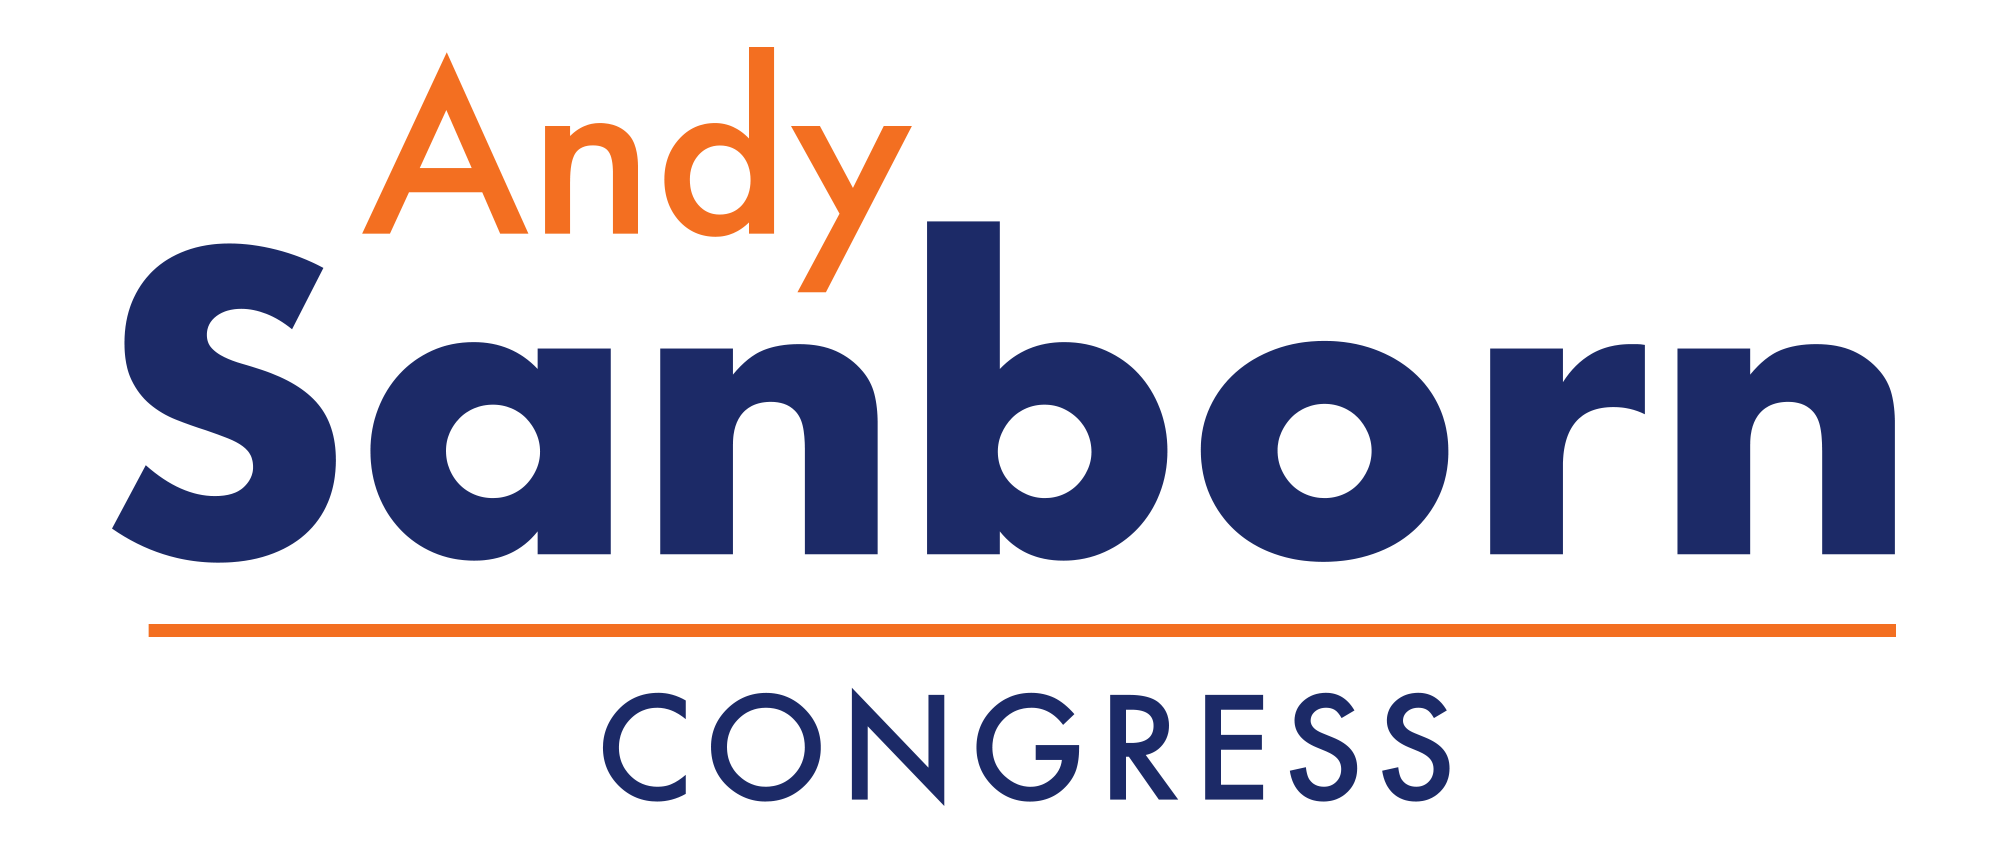 Andy Sanborn for Congress